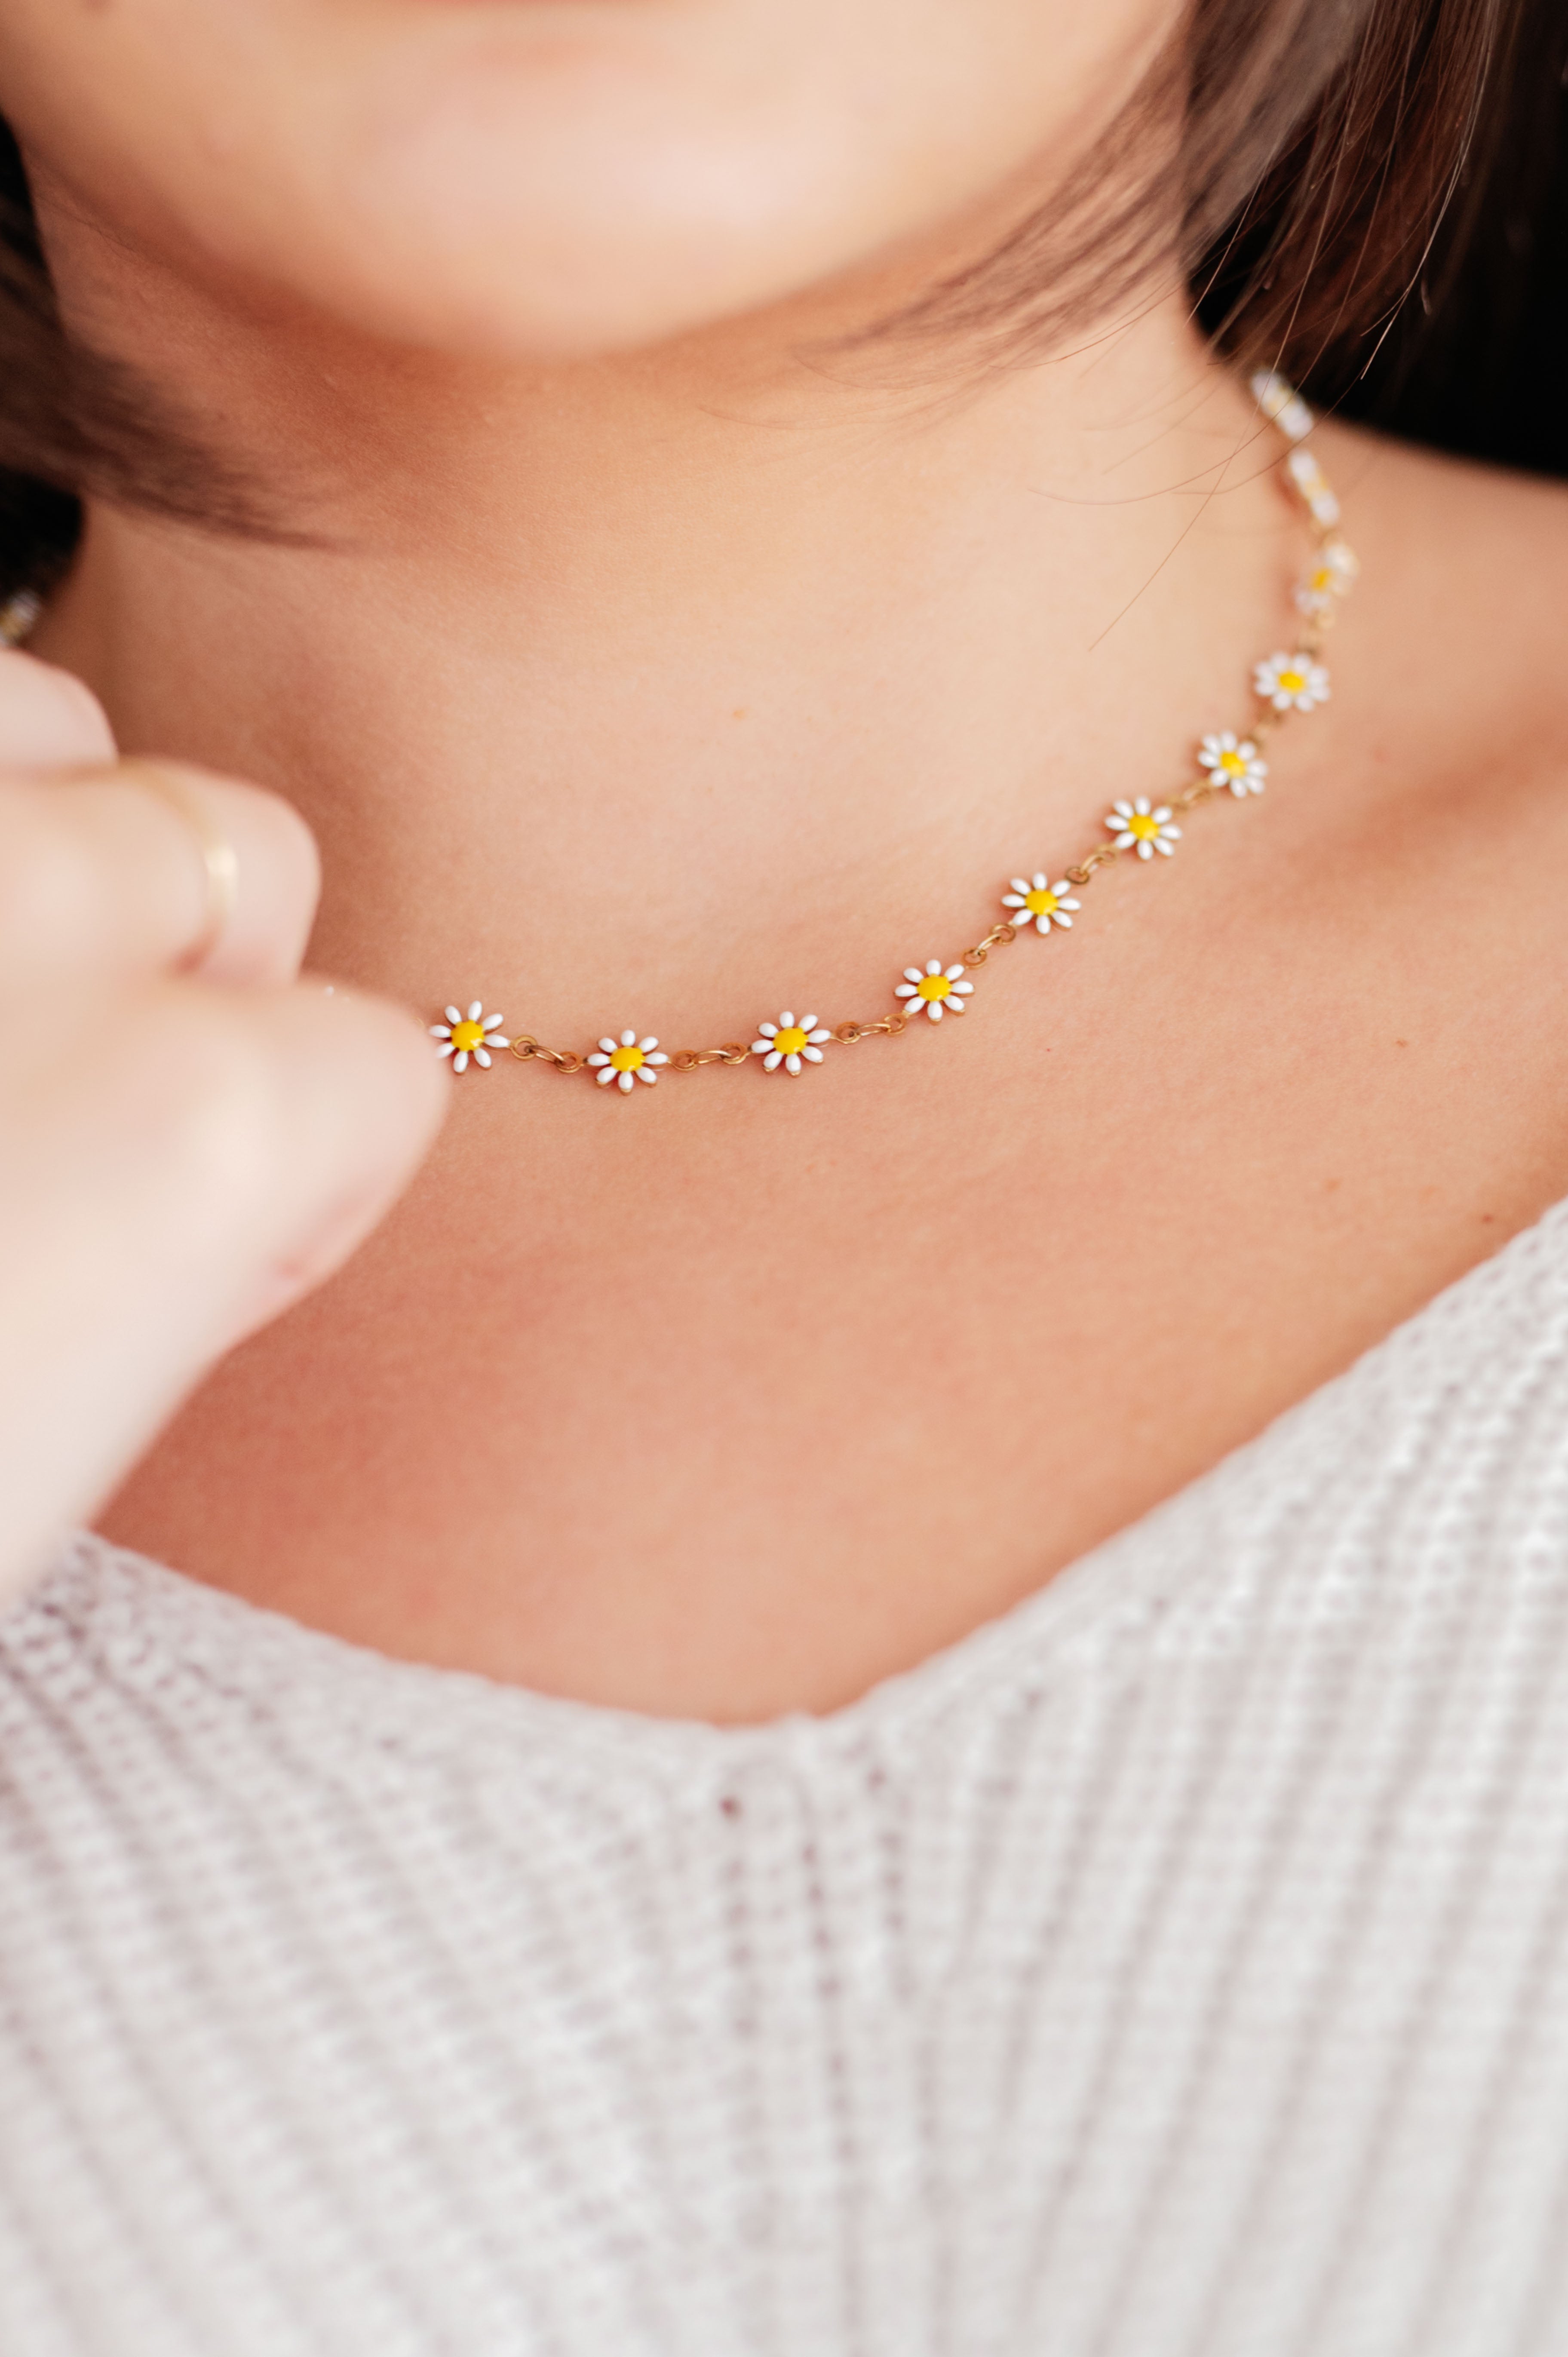 Close-up of a person wearing a delicate Wildflower Necklace in White by The Dapper Squirrel, featuring small white and yellow flower charms. Crafted with 18k gold plated details, this hypoallergenic piece beautifully complements their short, dark hair and light knit sweater. Focus remains on the necklace and the person's neckline.